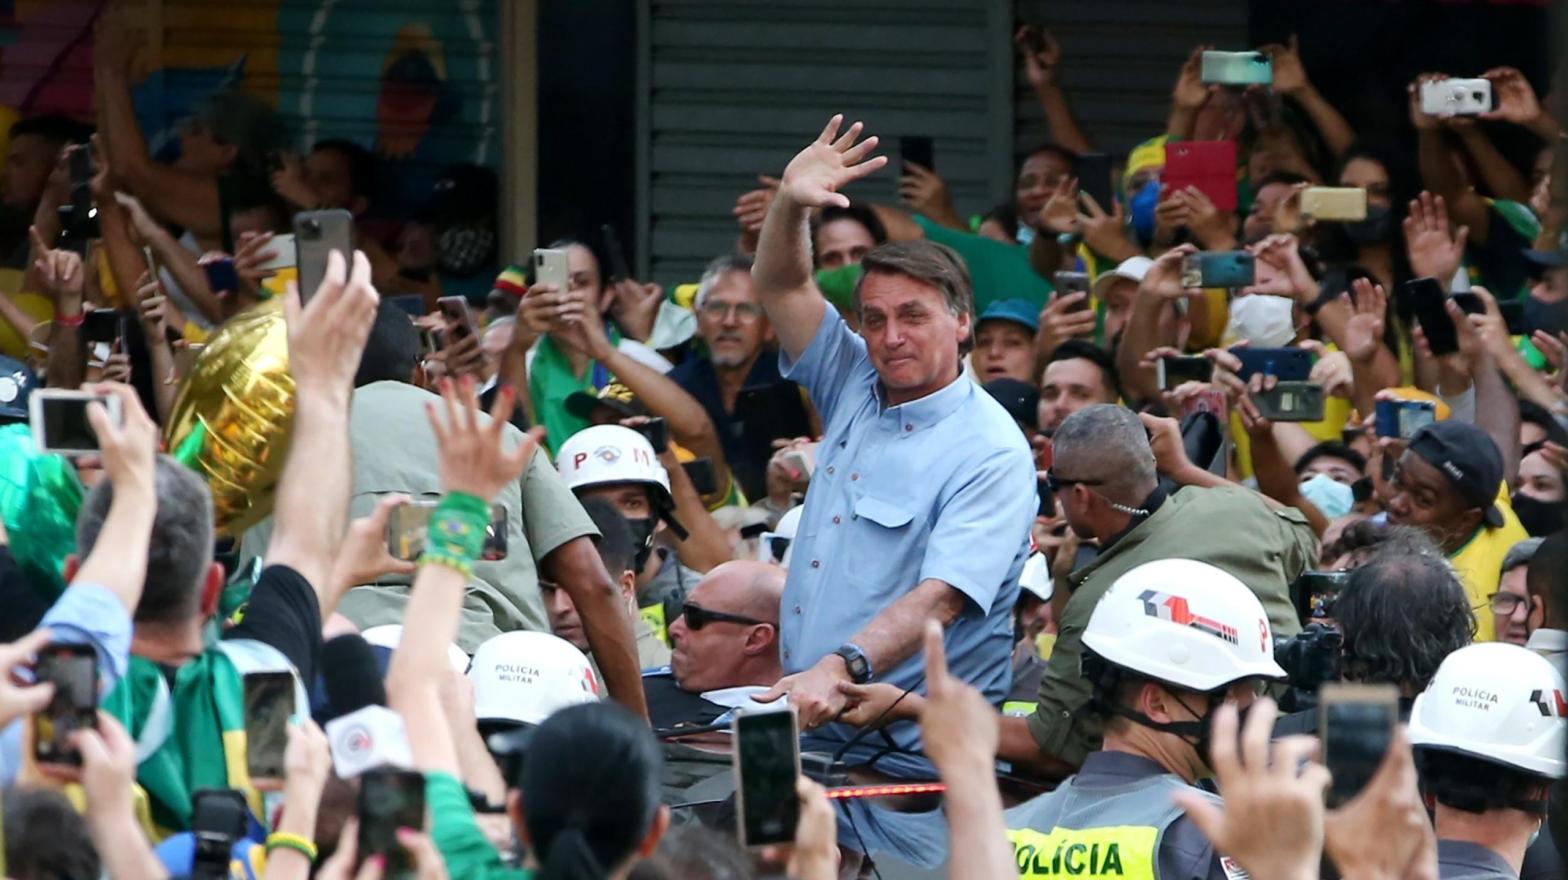 Jair Bolsonaro waves to his awful supporters at an Independence Day celebration on Paulista Avenue in Sao Paulo, Brazil, on Sept. 7, 2021. (Photo: Alexandre Schneider, Getty Images)